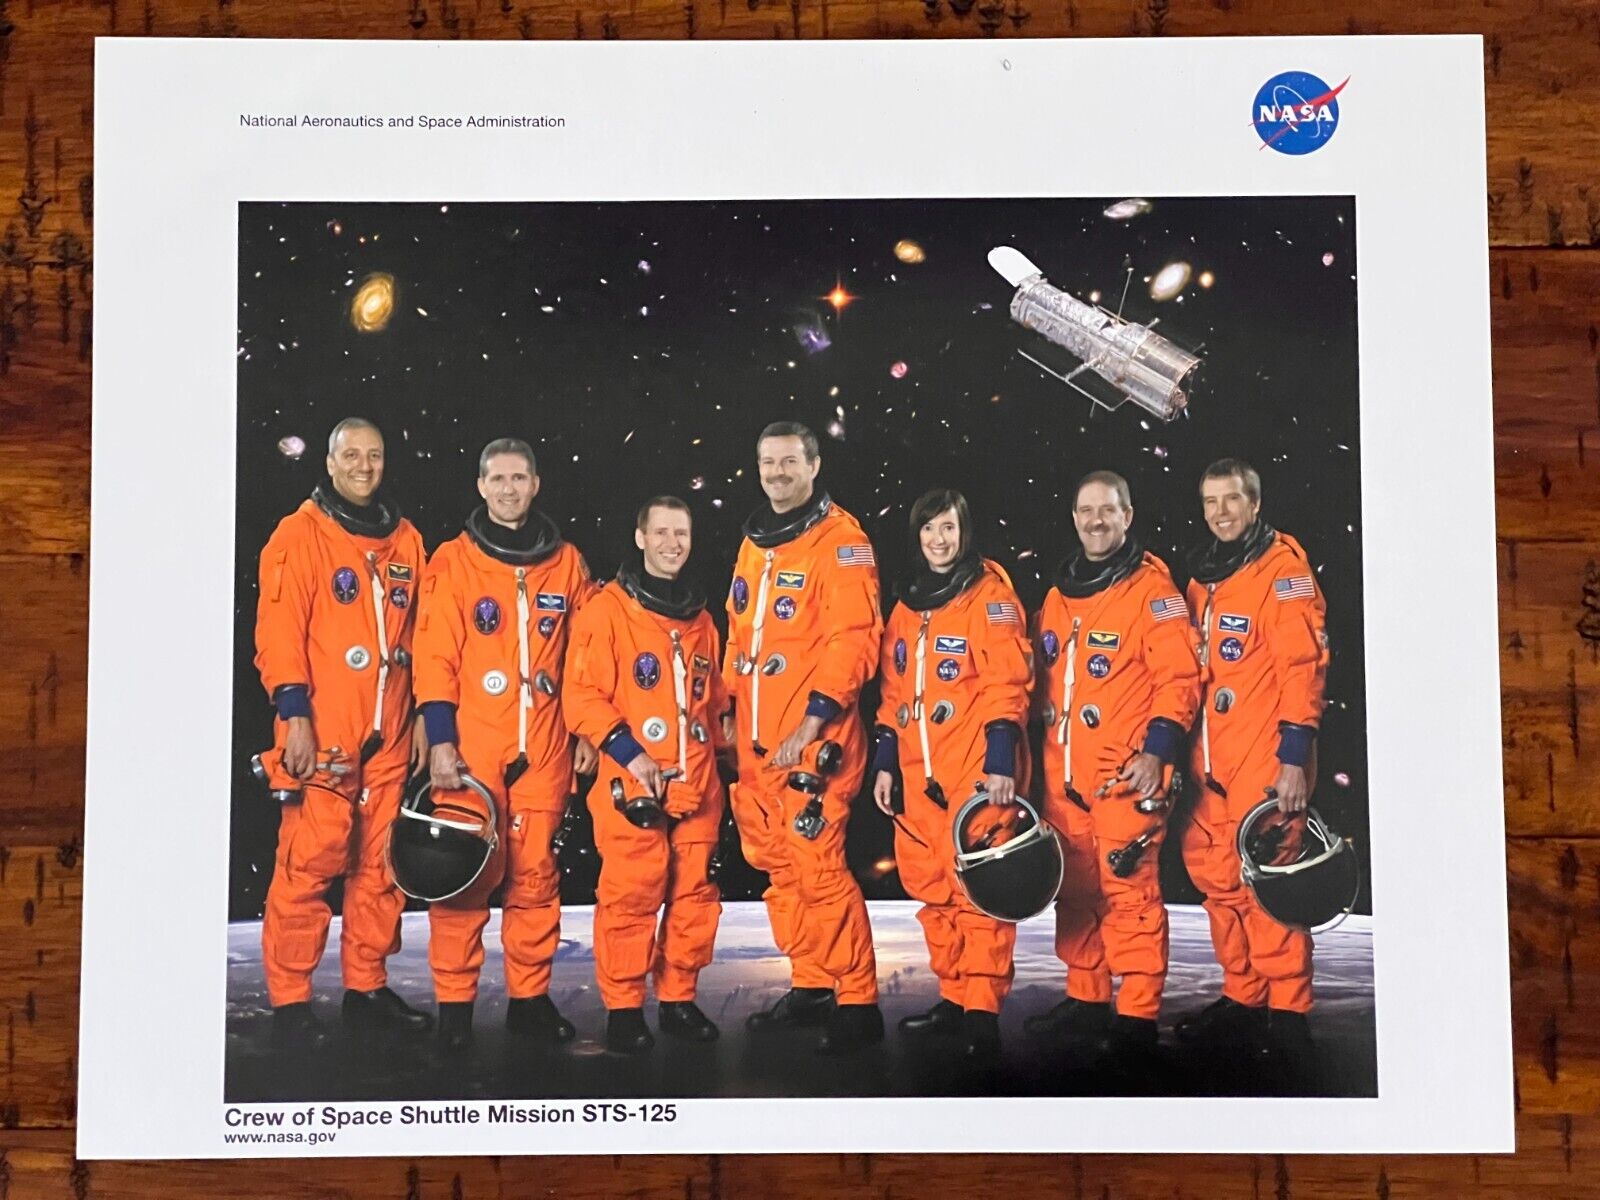 CREW OF SPACE SHUTTLE MISSION STS-125 - HUBBLE 2008 NASA 8x10 COLOR PHOTO